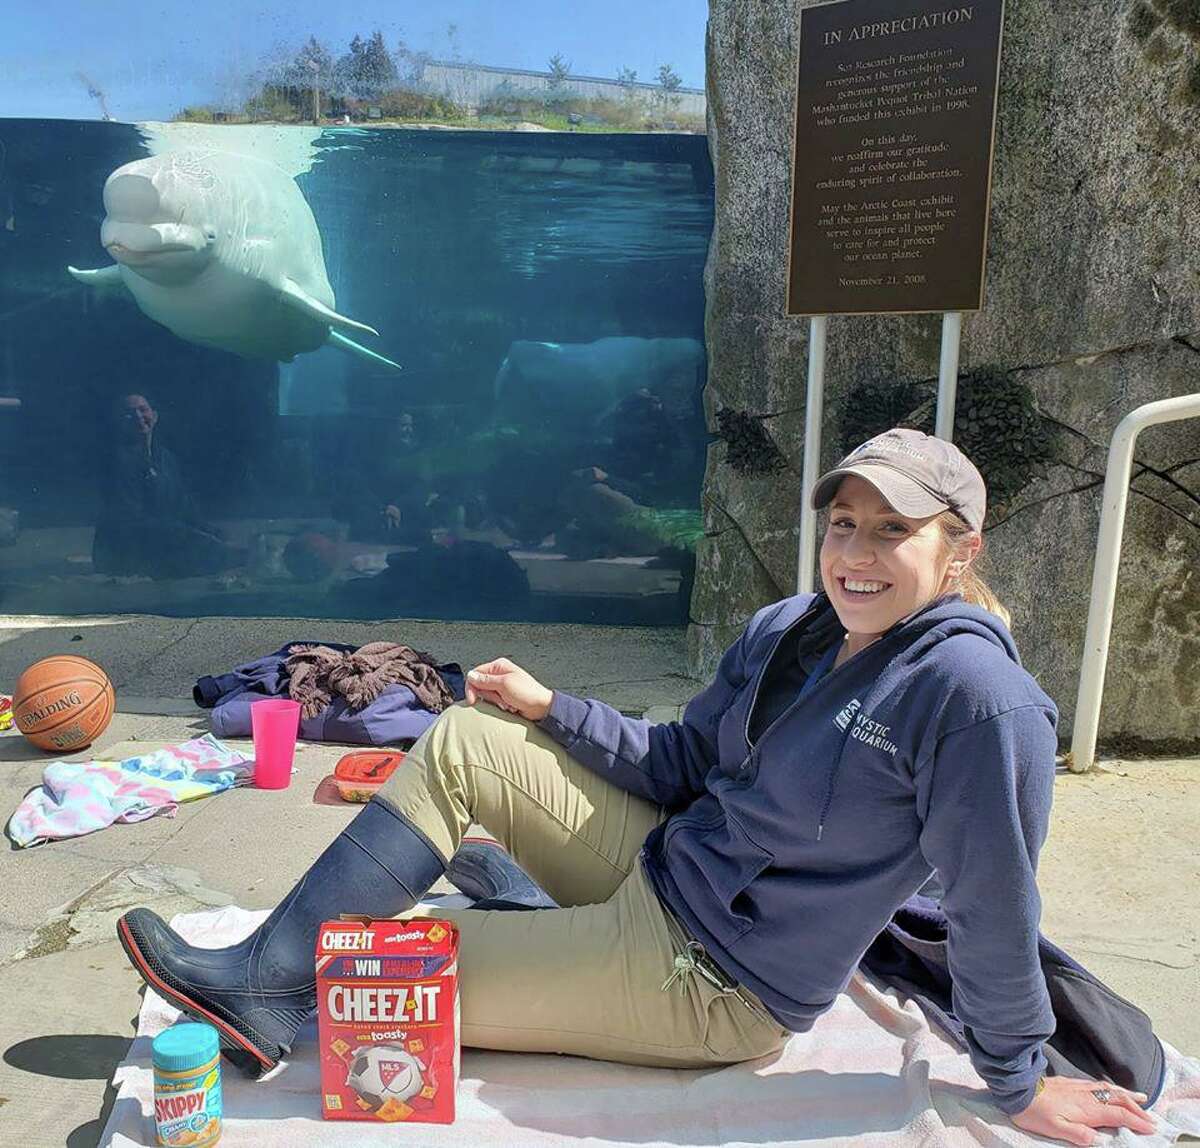 At the Mystic Aquarium in Mystic, Conn., California Sea Lion trainer Kim Hentz has lunch with Juno, a beluga whale, while the aquarium is closed due to the COVID-19 pandemic. Lunches at the exhibits helps ensure underwater viewing enrichment for the animals as they go without seeing visitors.